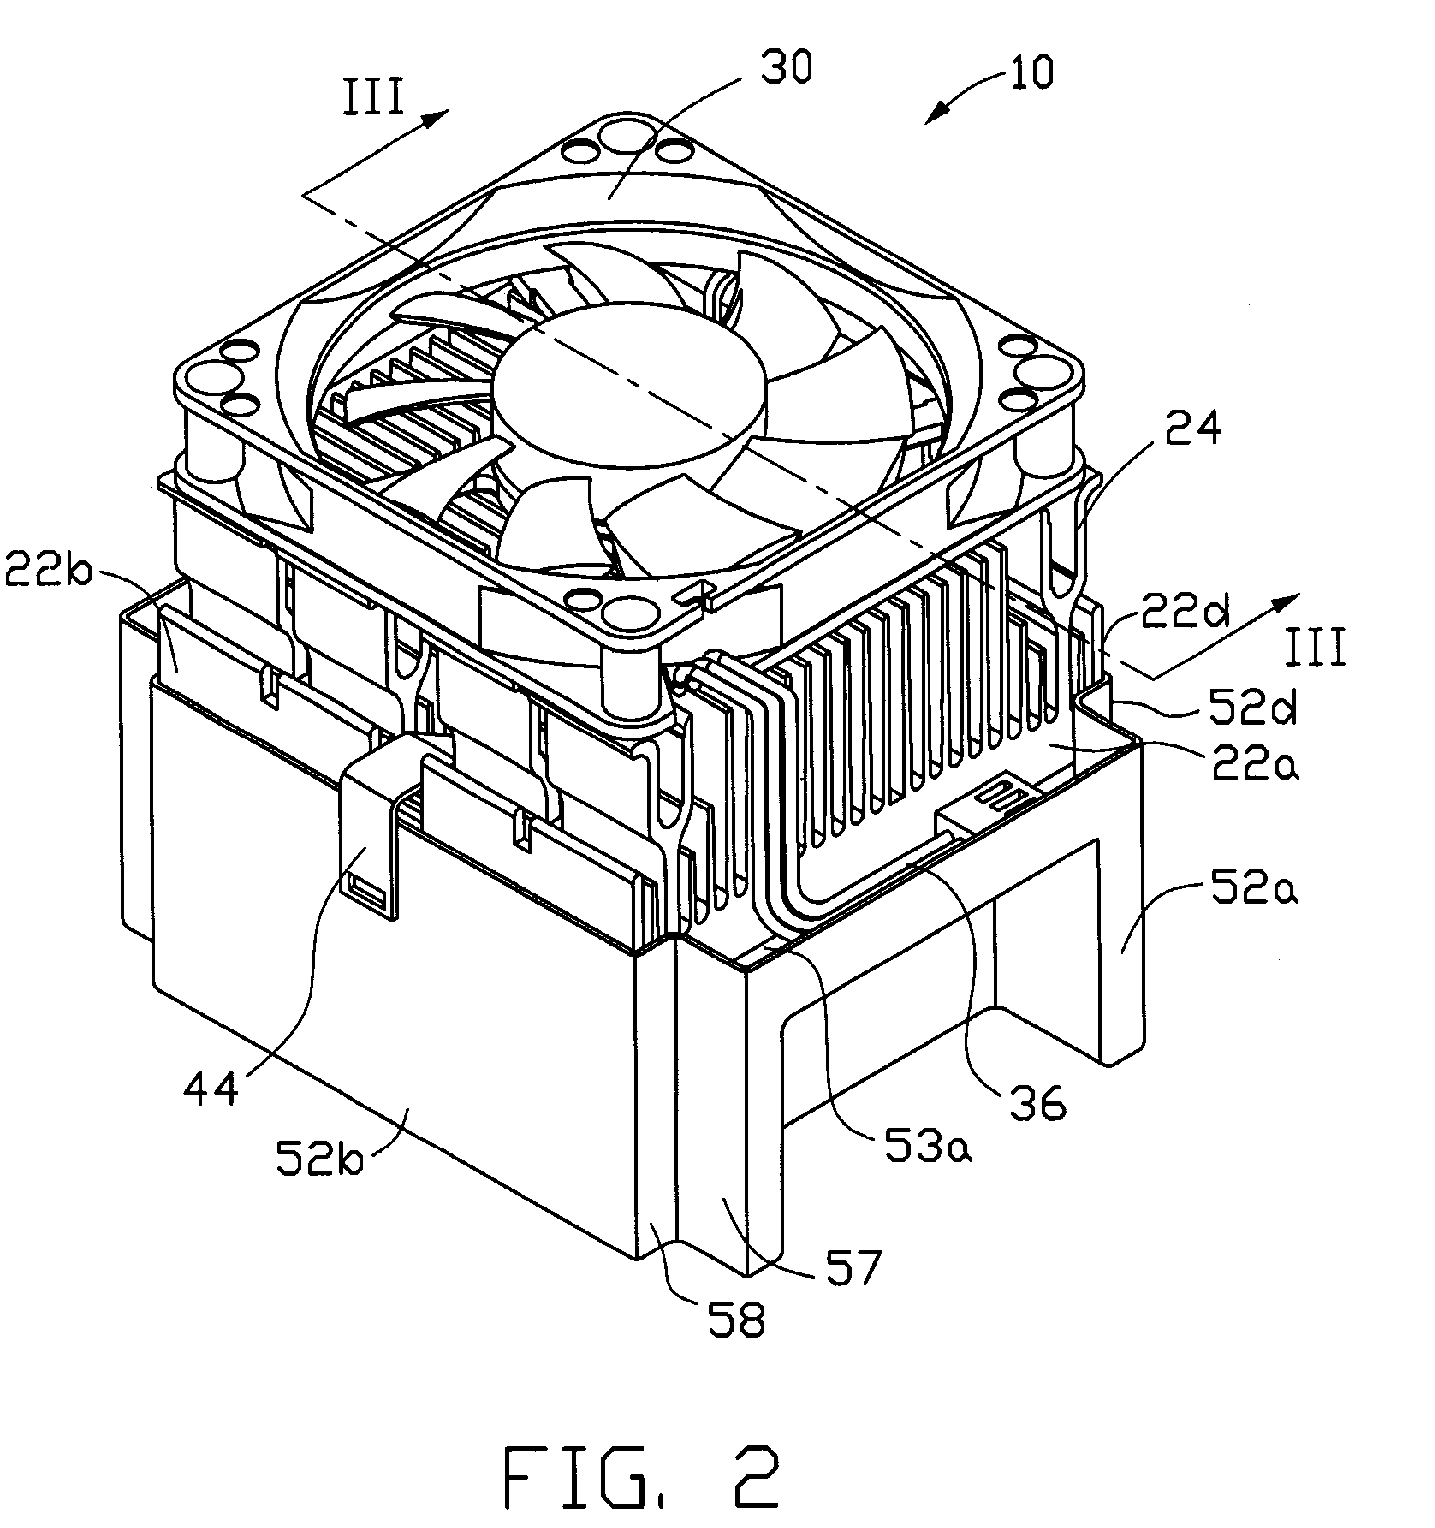 Grease cover for heat dissipating apparatus